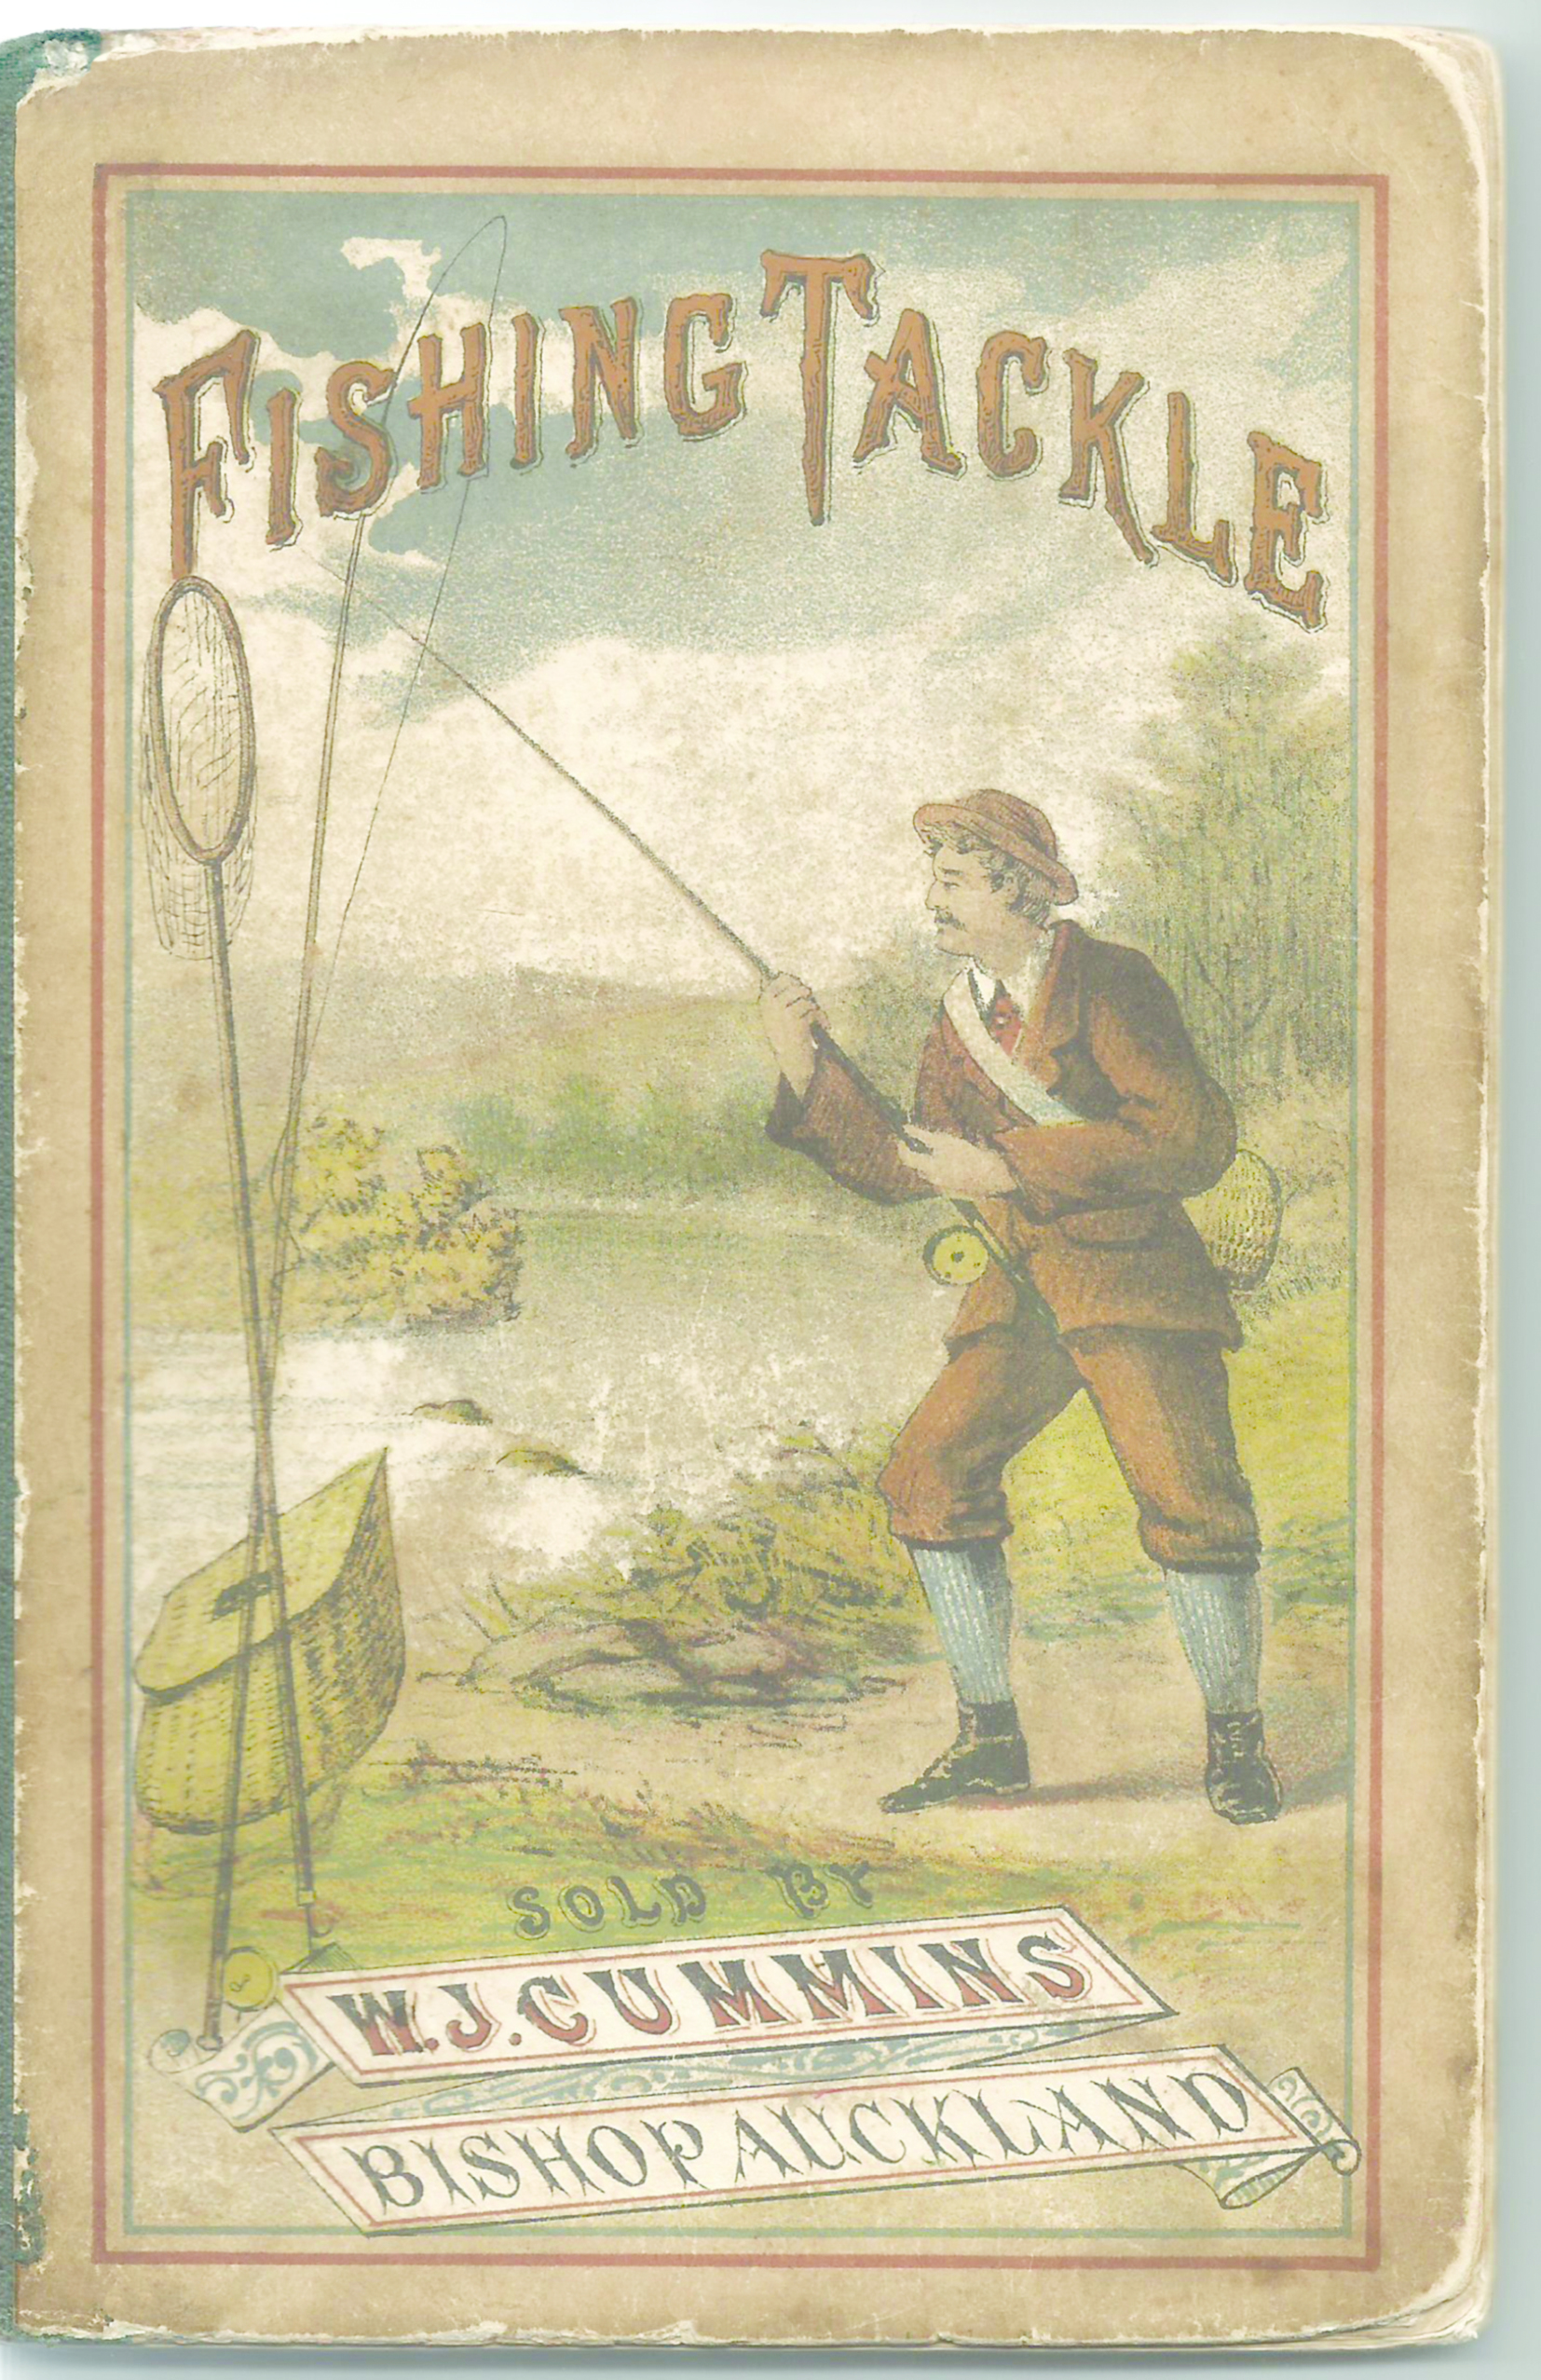 A fishing tackle catalogue by WJ Cummins, of Bishop Auckland, one of the biggest tackle dealers in the district